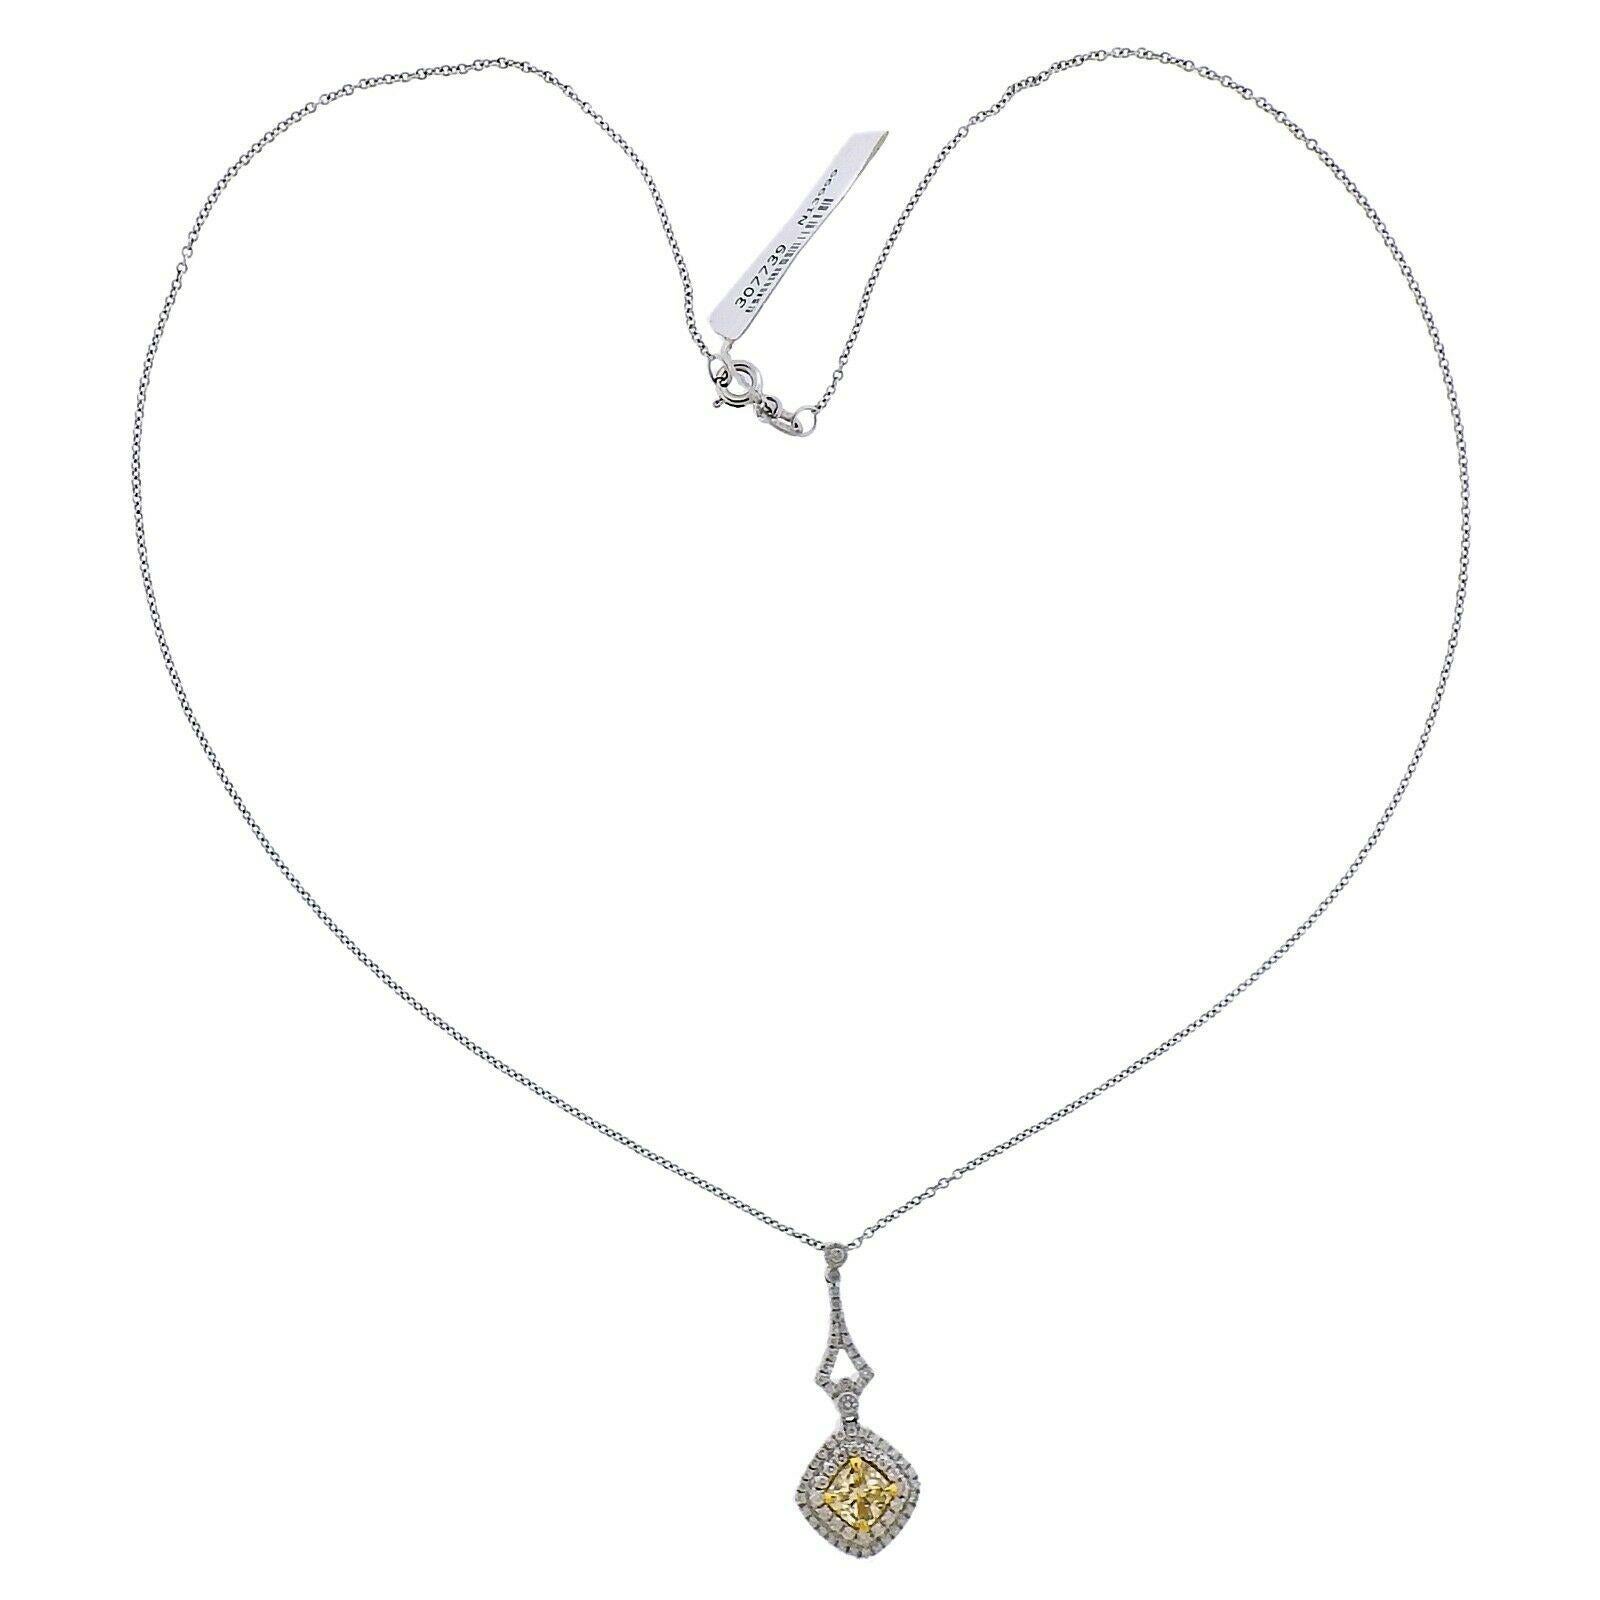 18k white gold pendant necklace by Dalumi. Set with a 1.00ctw VS2 fancy yellow cushion cut center, and 1.40ctw of VS2/H side diamonds. Necklace is 18